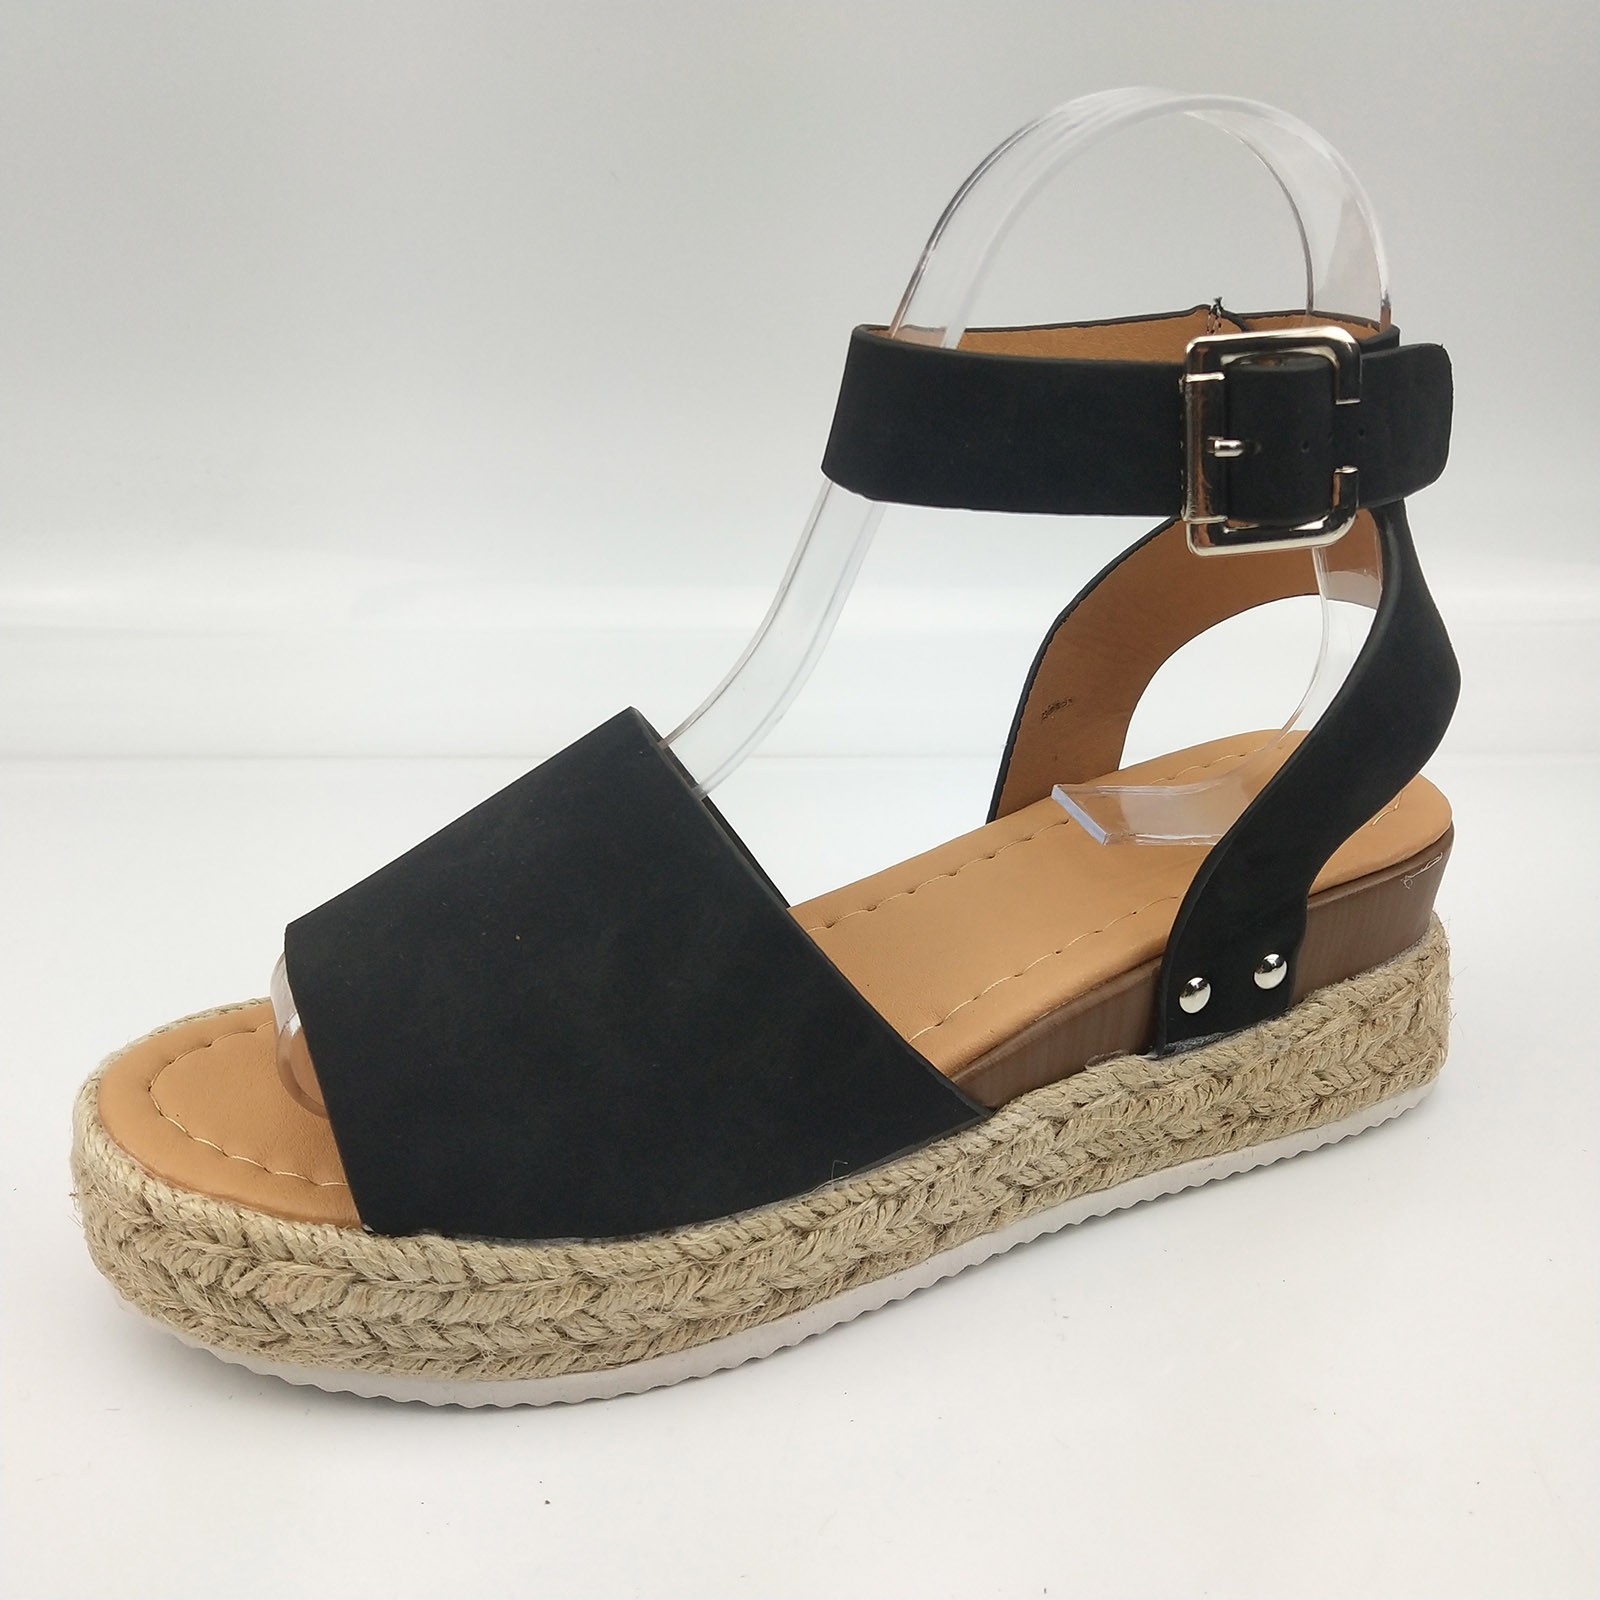 Azrian Woman Summer Sandals Open toe Casual Platform Wedge Shoes Casual Canvas Shoes - image 5 of 5